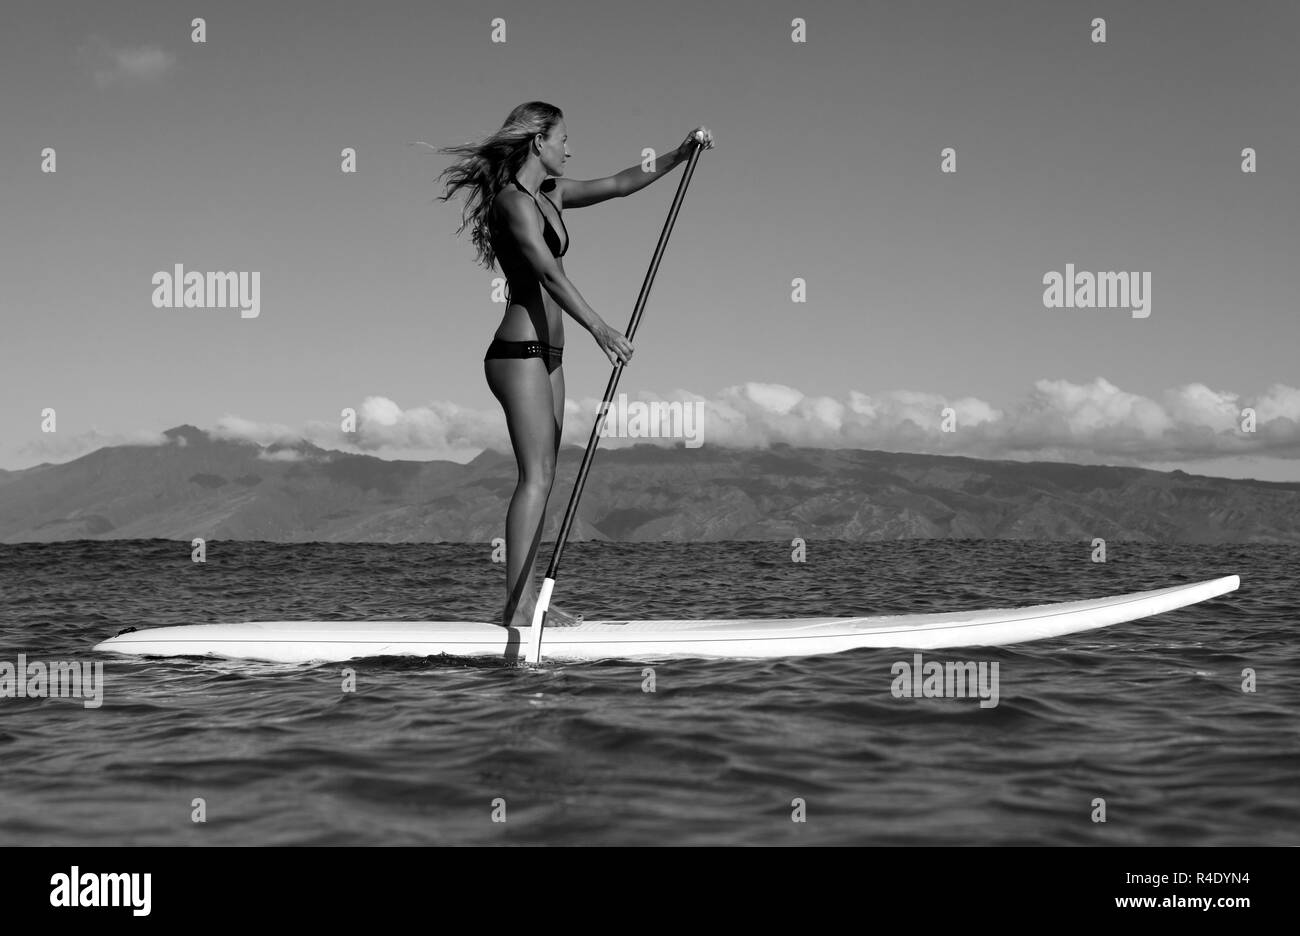 Fit, athletic woman stand up paddles at Napili Bay, Maui, Hawaii with Molokai in the distance. Stock Photo